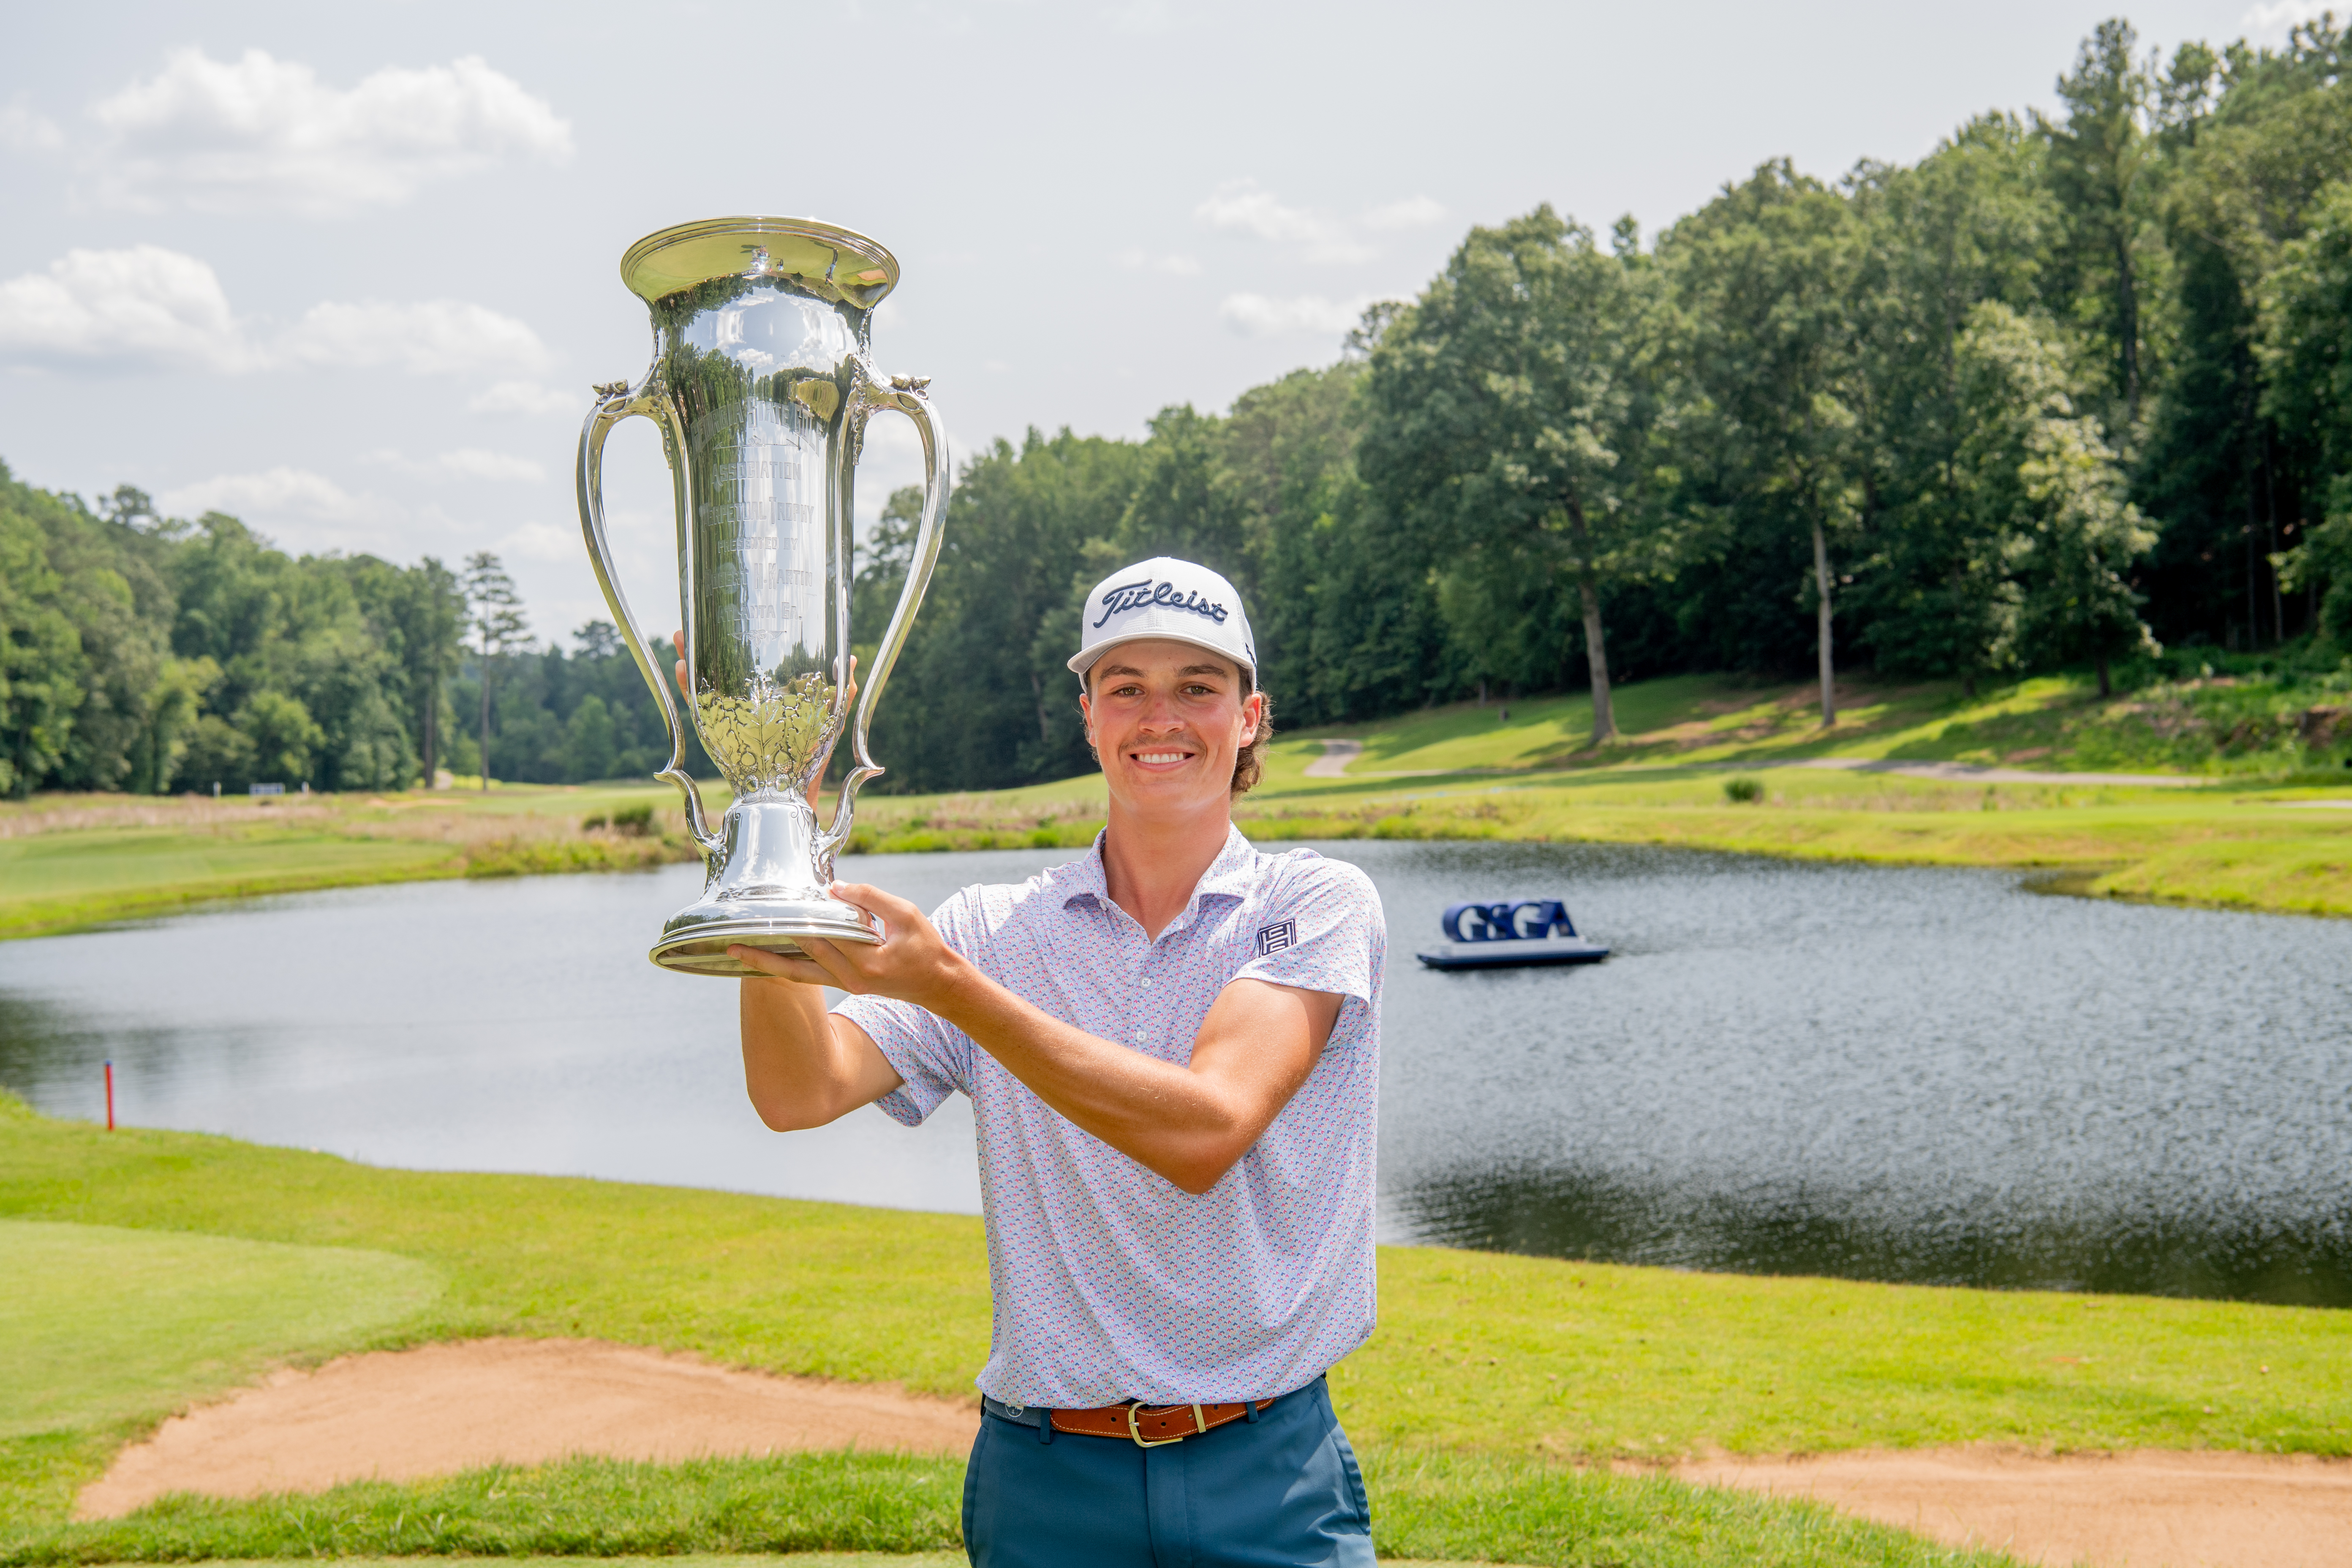 Jake Peacock re-finds footing in time to win Georgia Amateur title